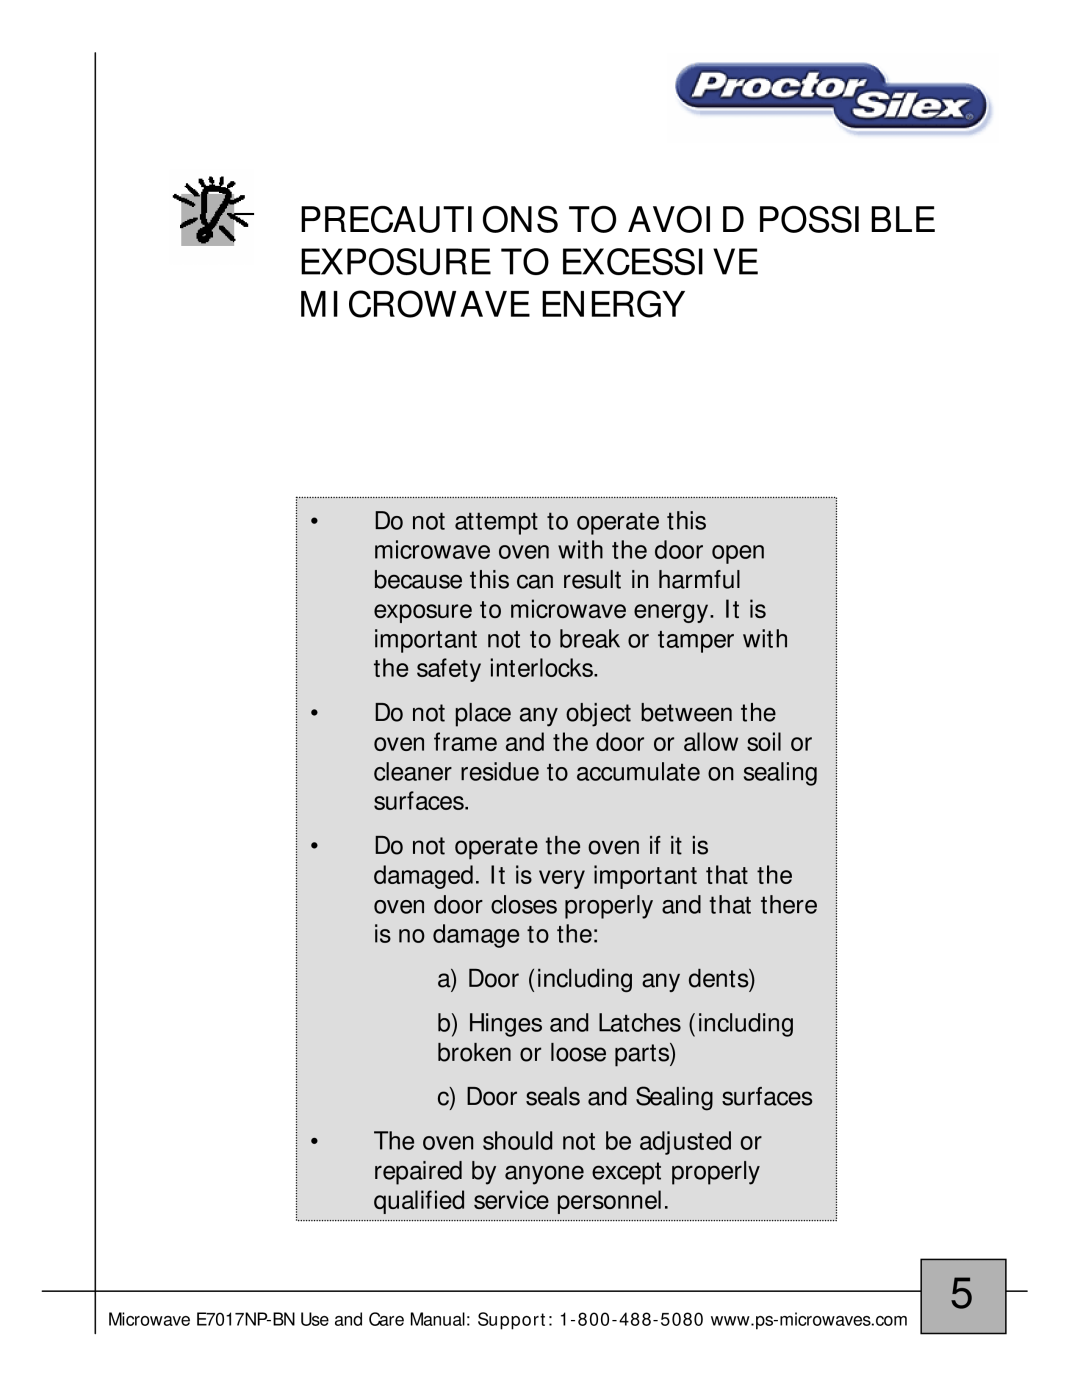 Proctor-Silex E7017NP-BN owner manual Precautions To Avoid Possible Exposure To Excessive Microwave Energy 